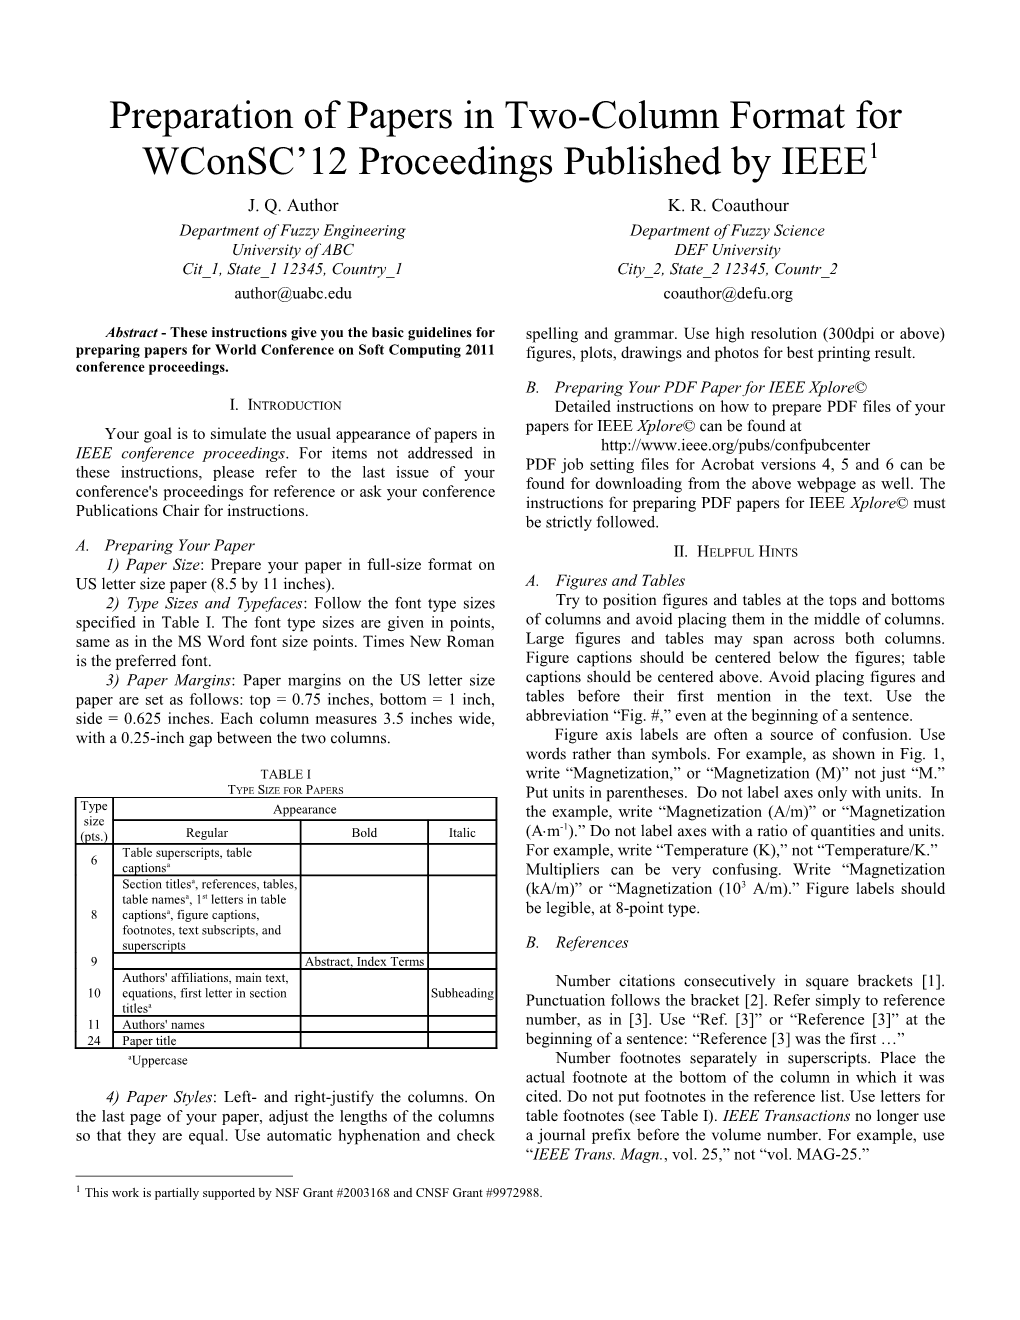 Preparation of Papers in a Two-Column Format for NAFIPS 04 Conference